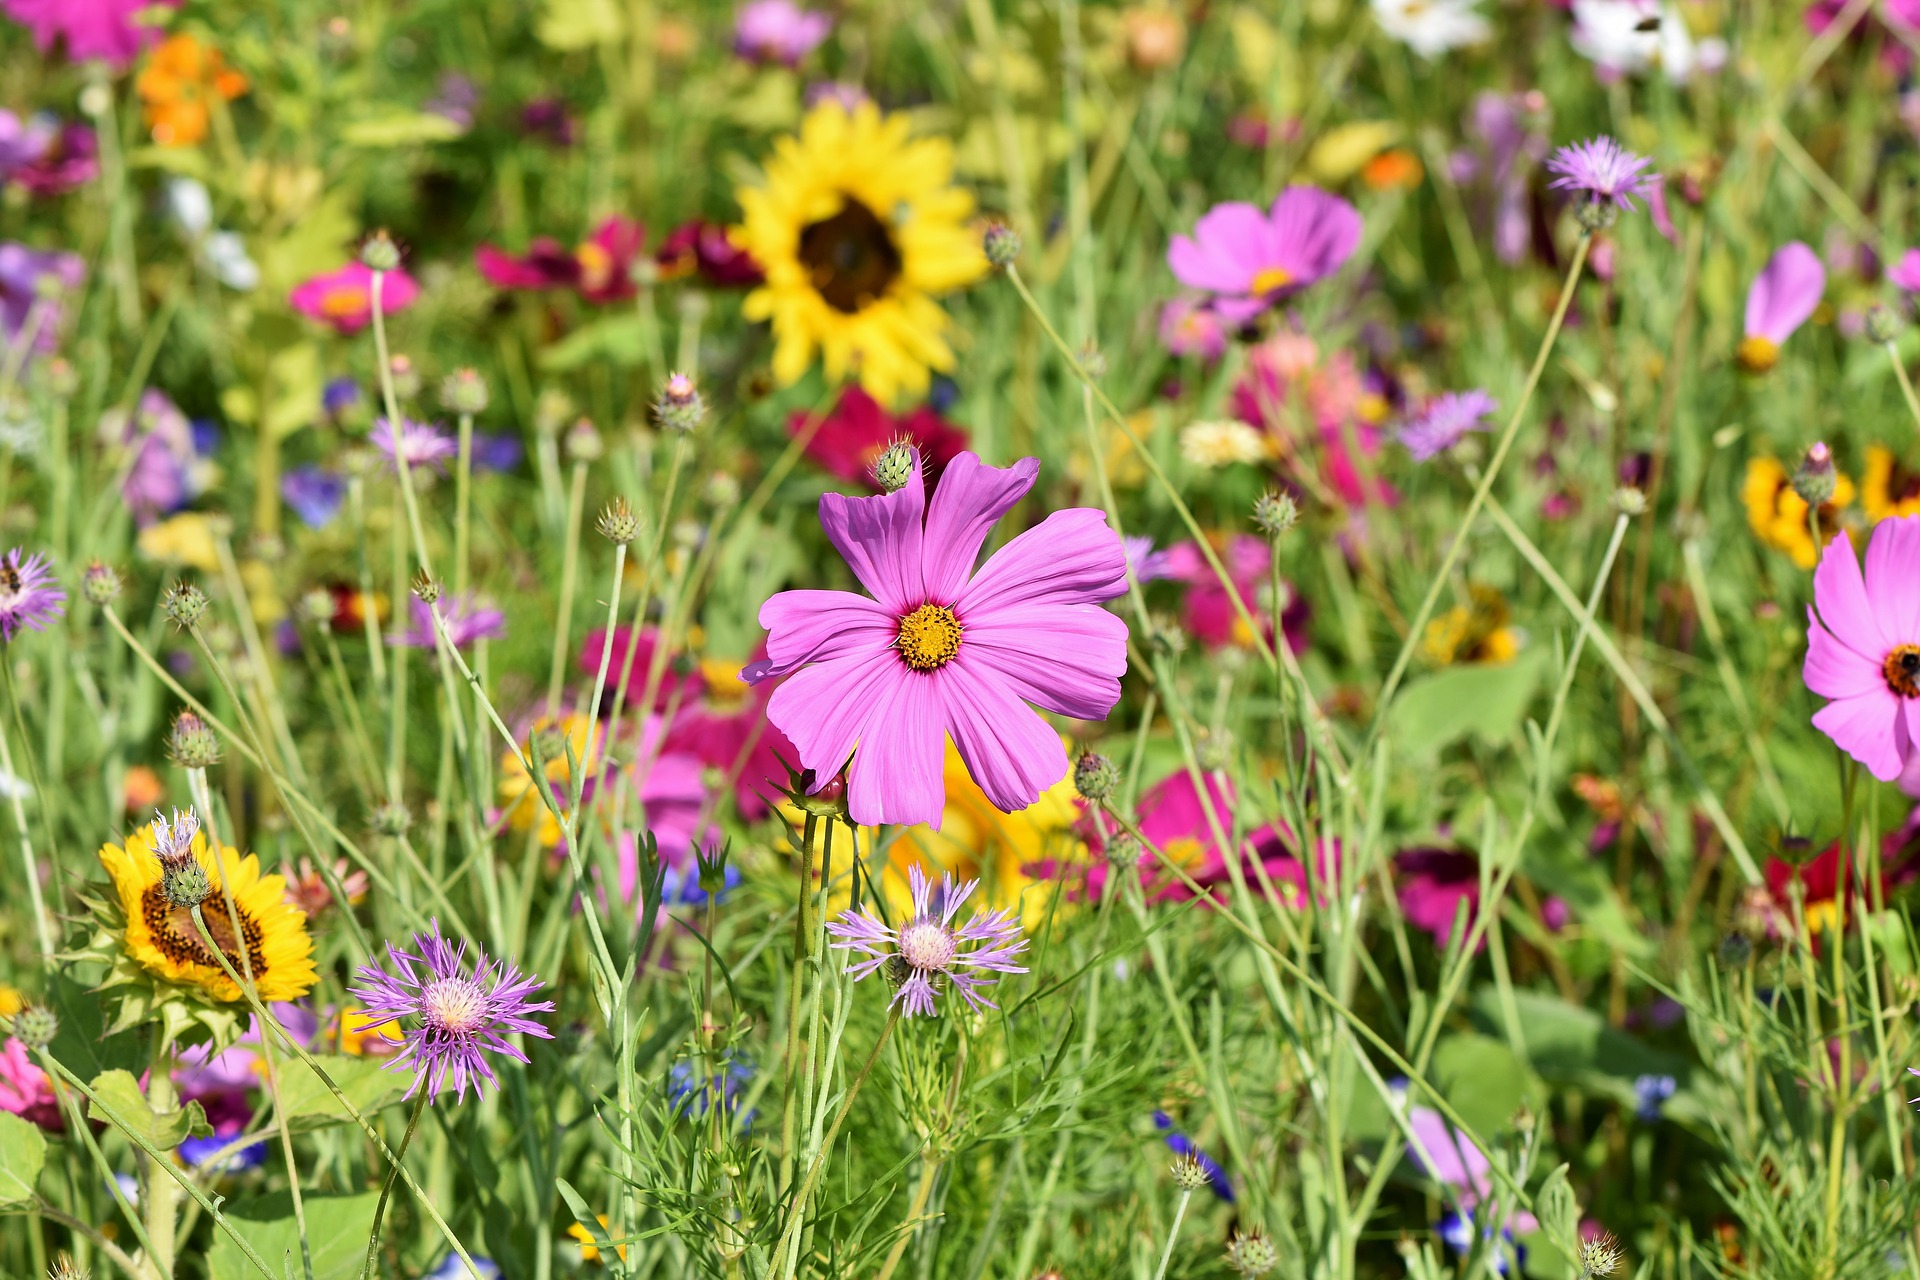 Flowers of many colors in a green field